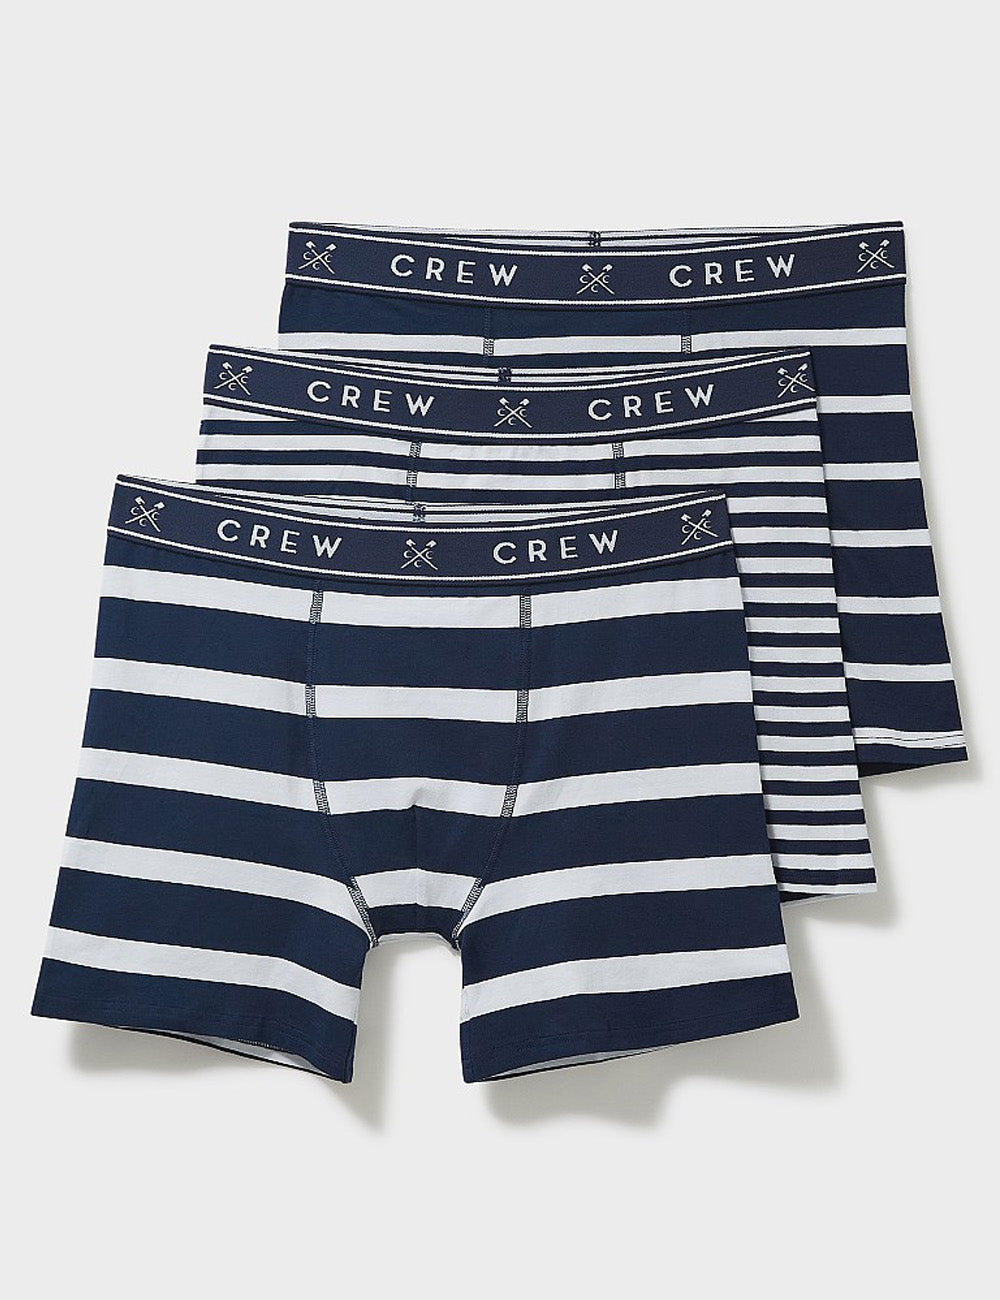 Crew Clothing's Jersey Boxers on a grey background